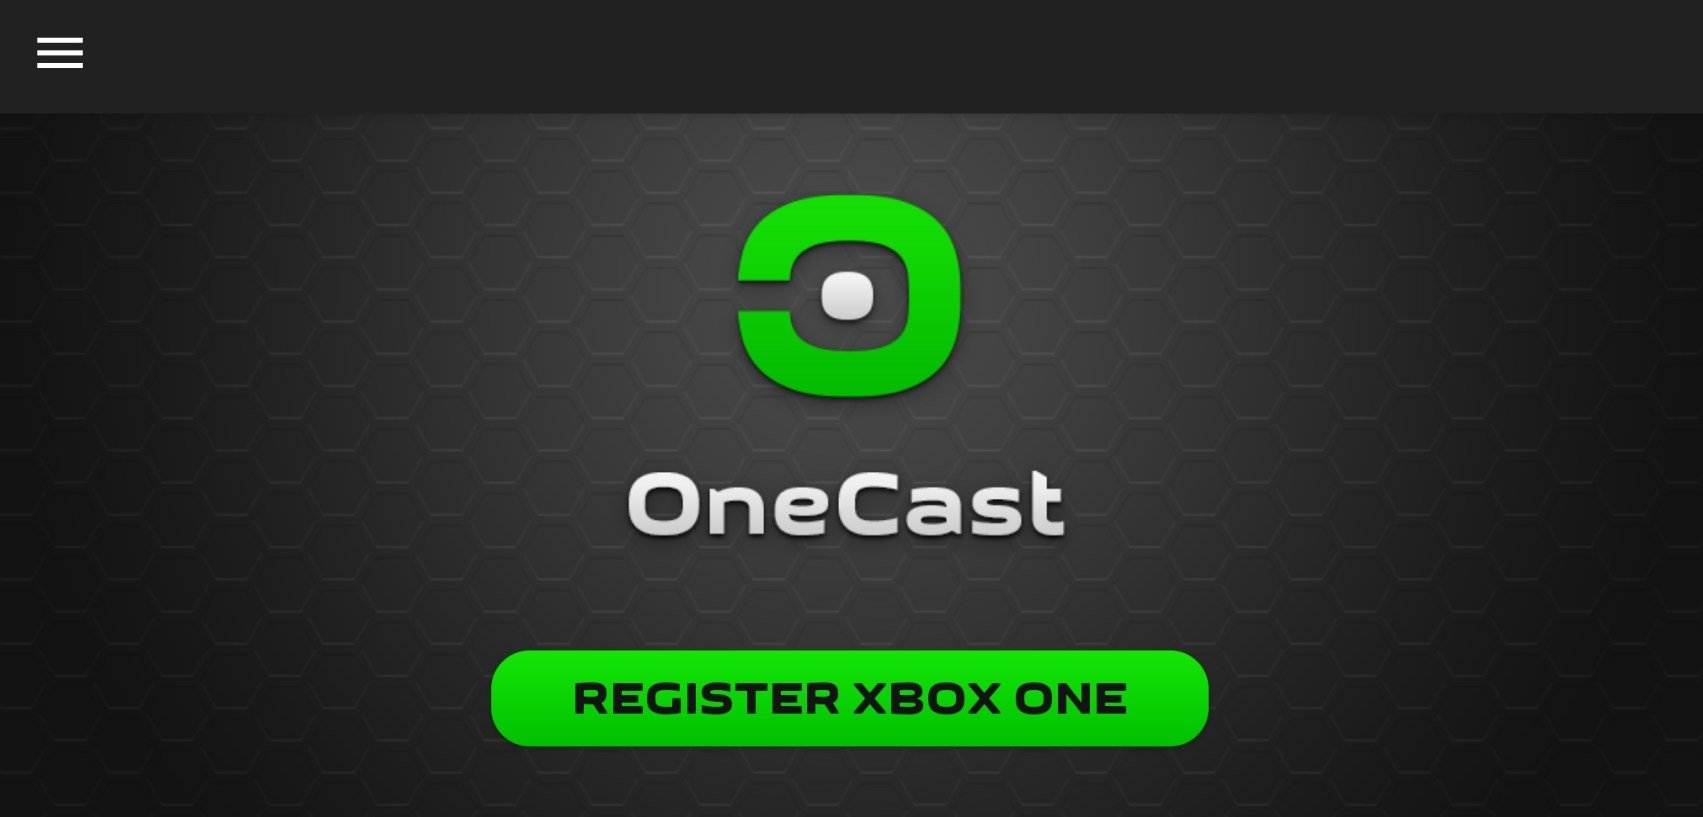 onecast play over internet xbox